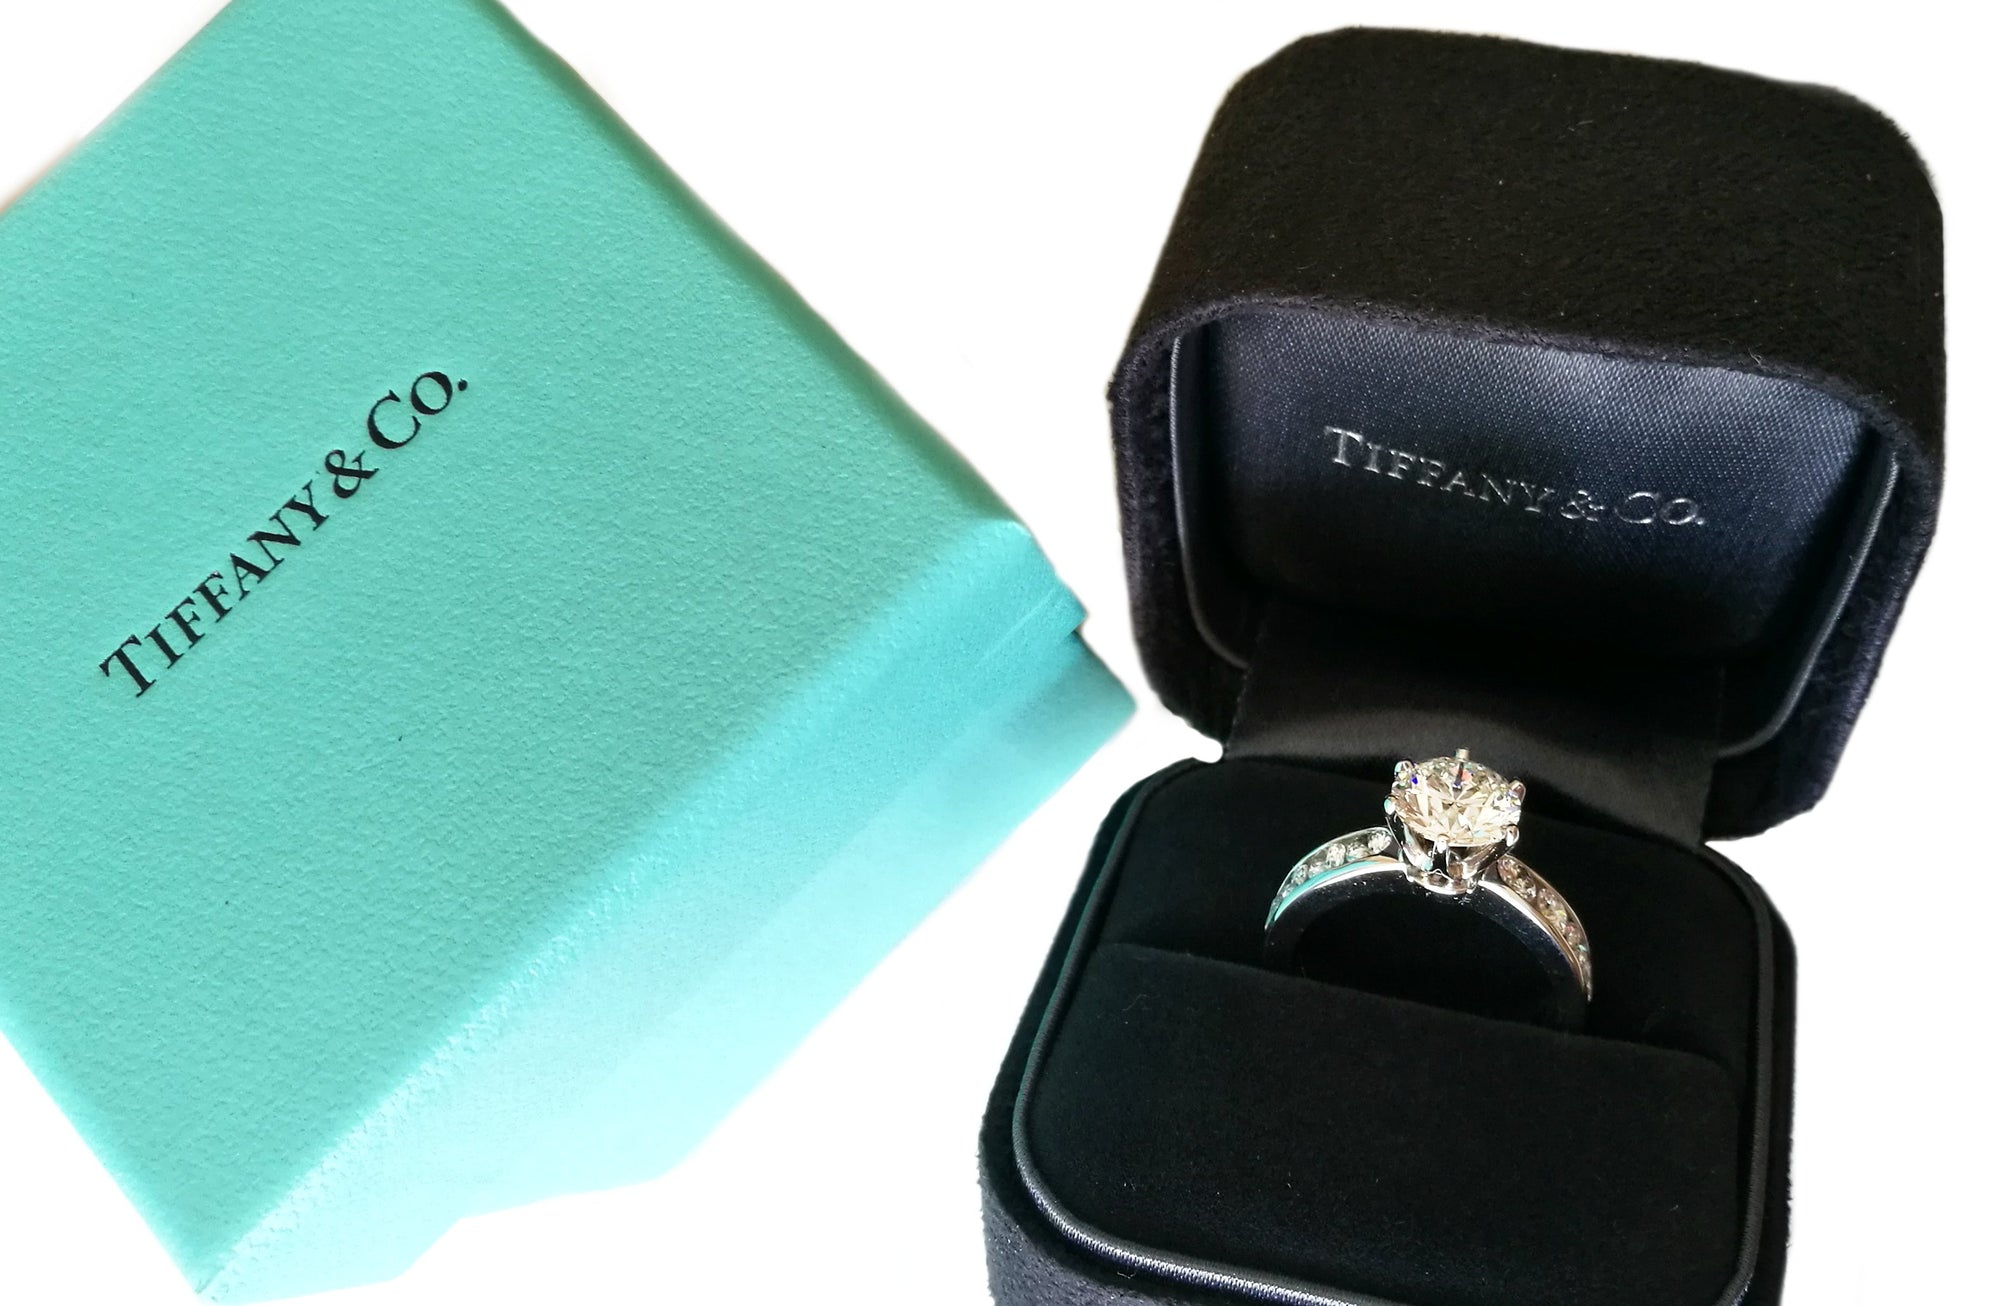 Tiffany & Co. 2.44tcw H/VVS1 Round Brilliant Engagement Ring with Channel Set Diamond Band